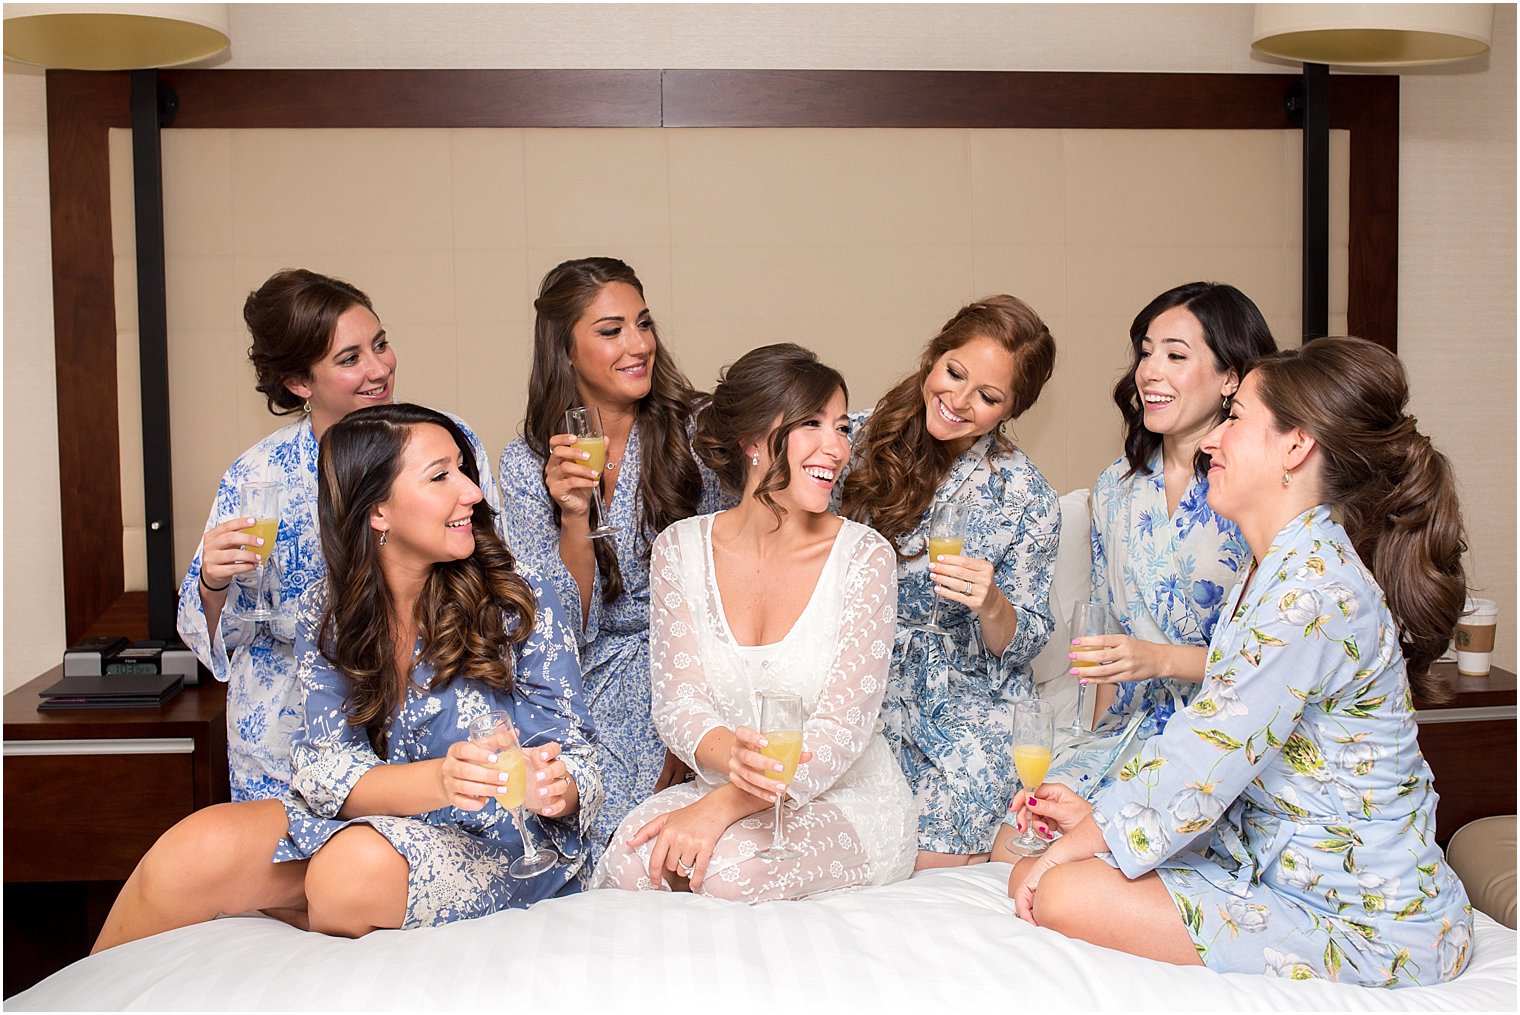 Bridesmaids in matching robes